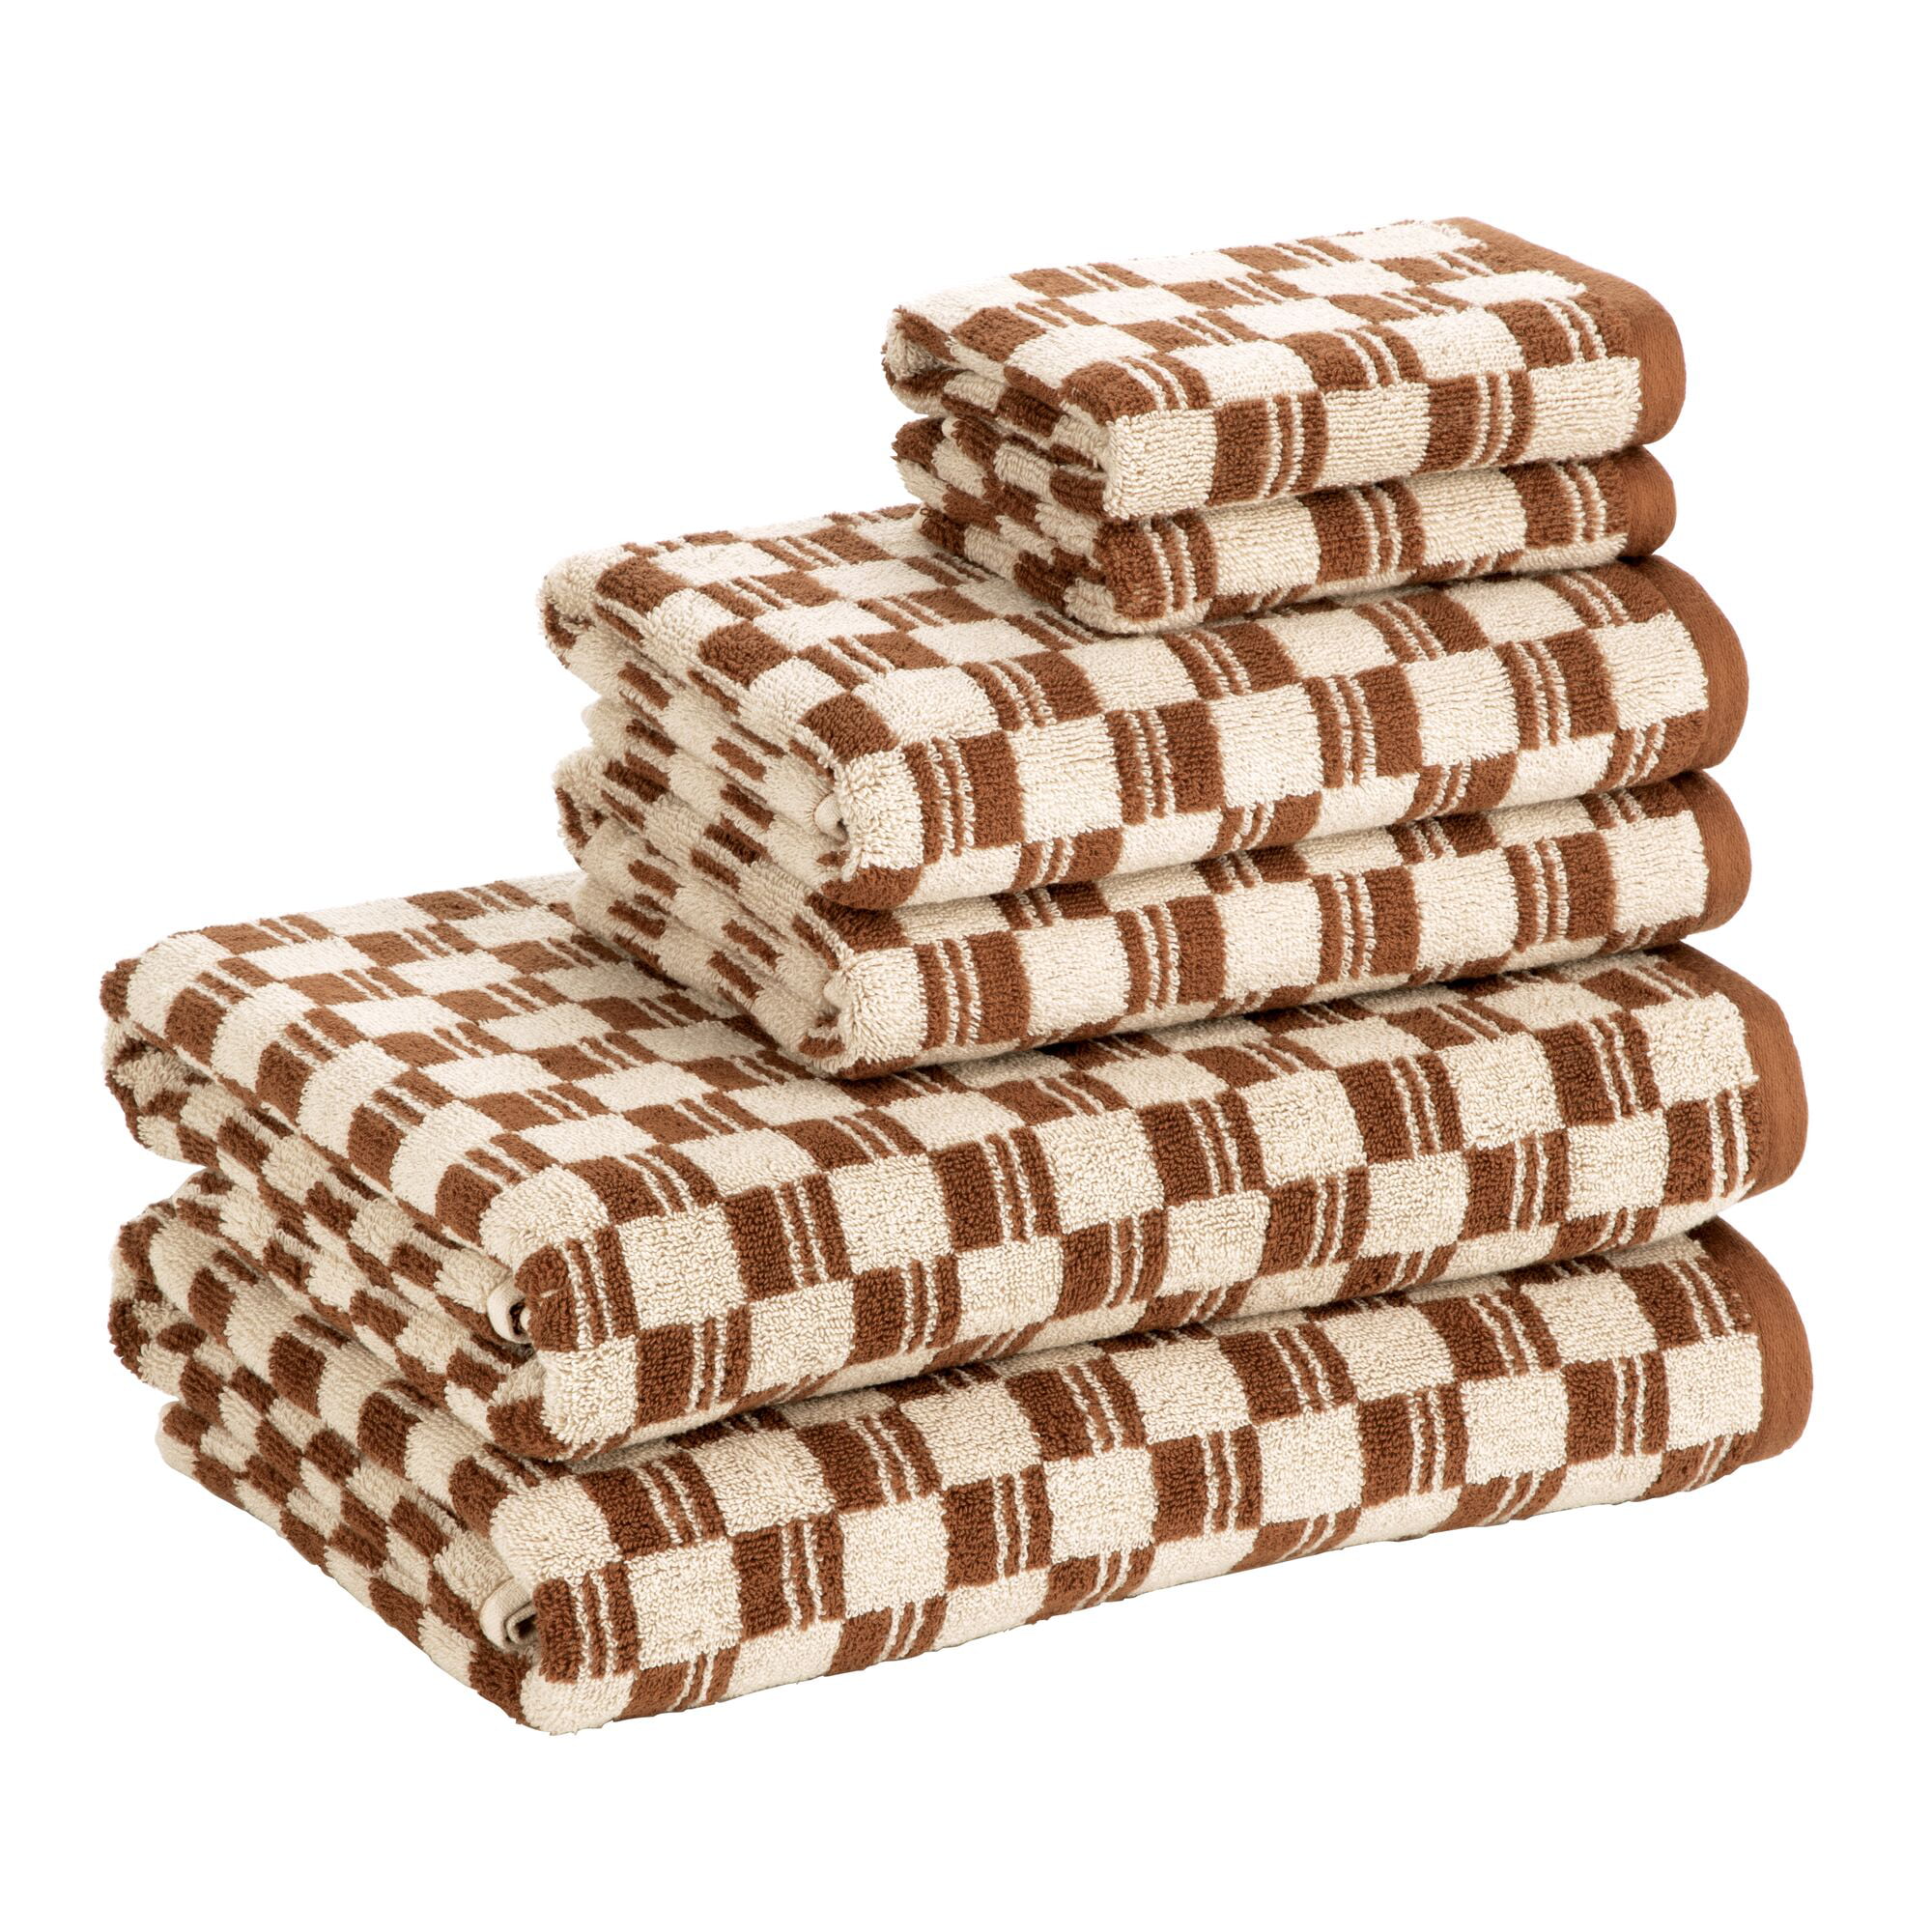  Nate Home by Nate Berkus 100% Cotton Terry 6-Piece Bath Towel  Set  2 Bath Towels, Hand Towels, and Washcloths, 608 GSM, Ultra Soft,  Absorbent for Bathroom from mDesign - Set/6